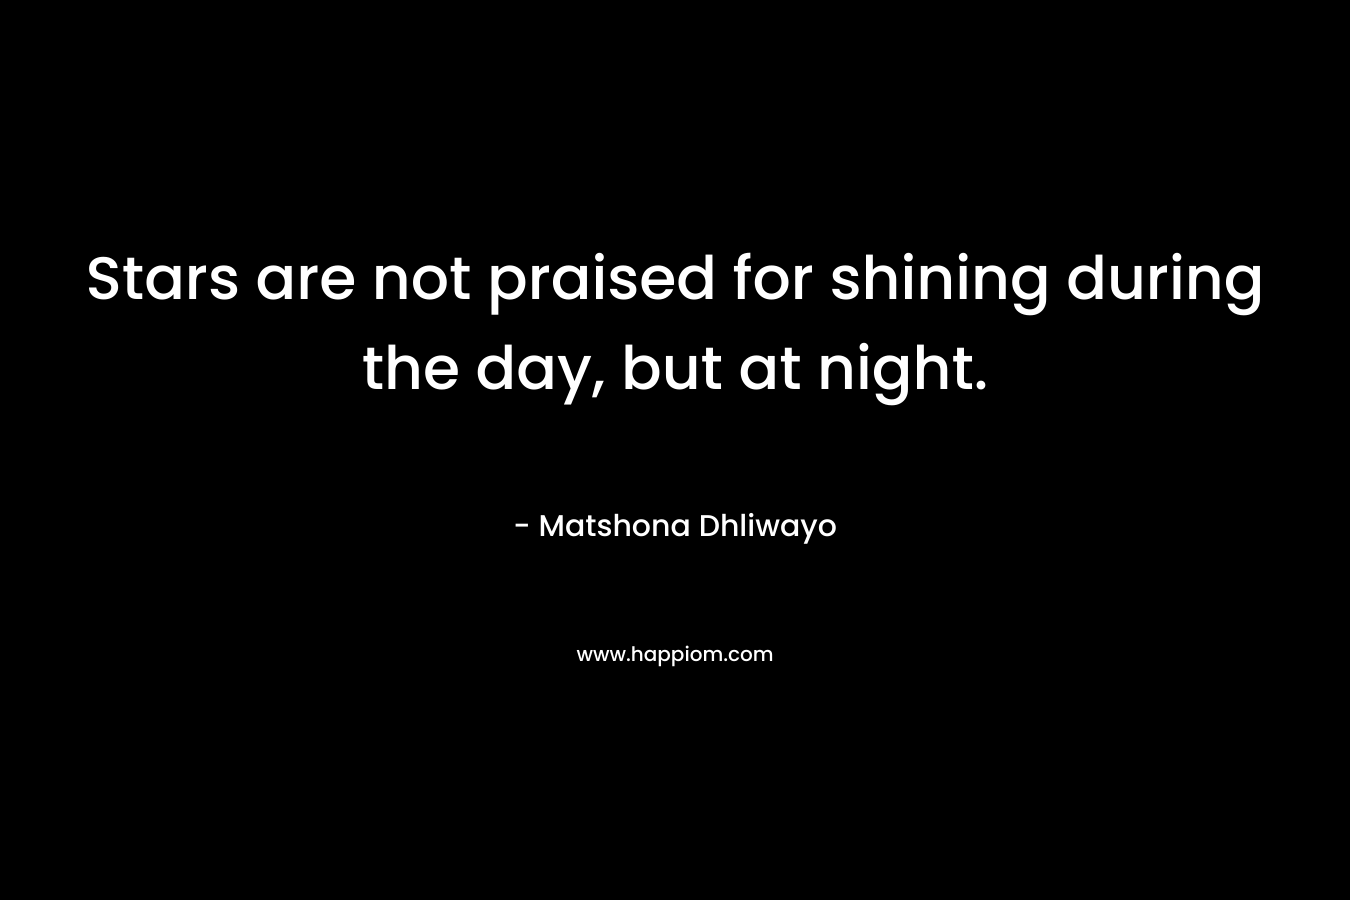 Stars are not praised for shining during the day, but at night. – Matshona Dhliwayo